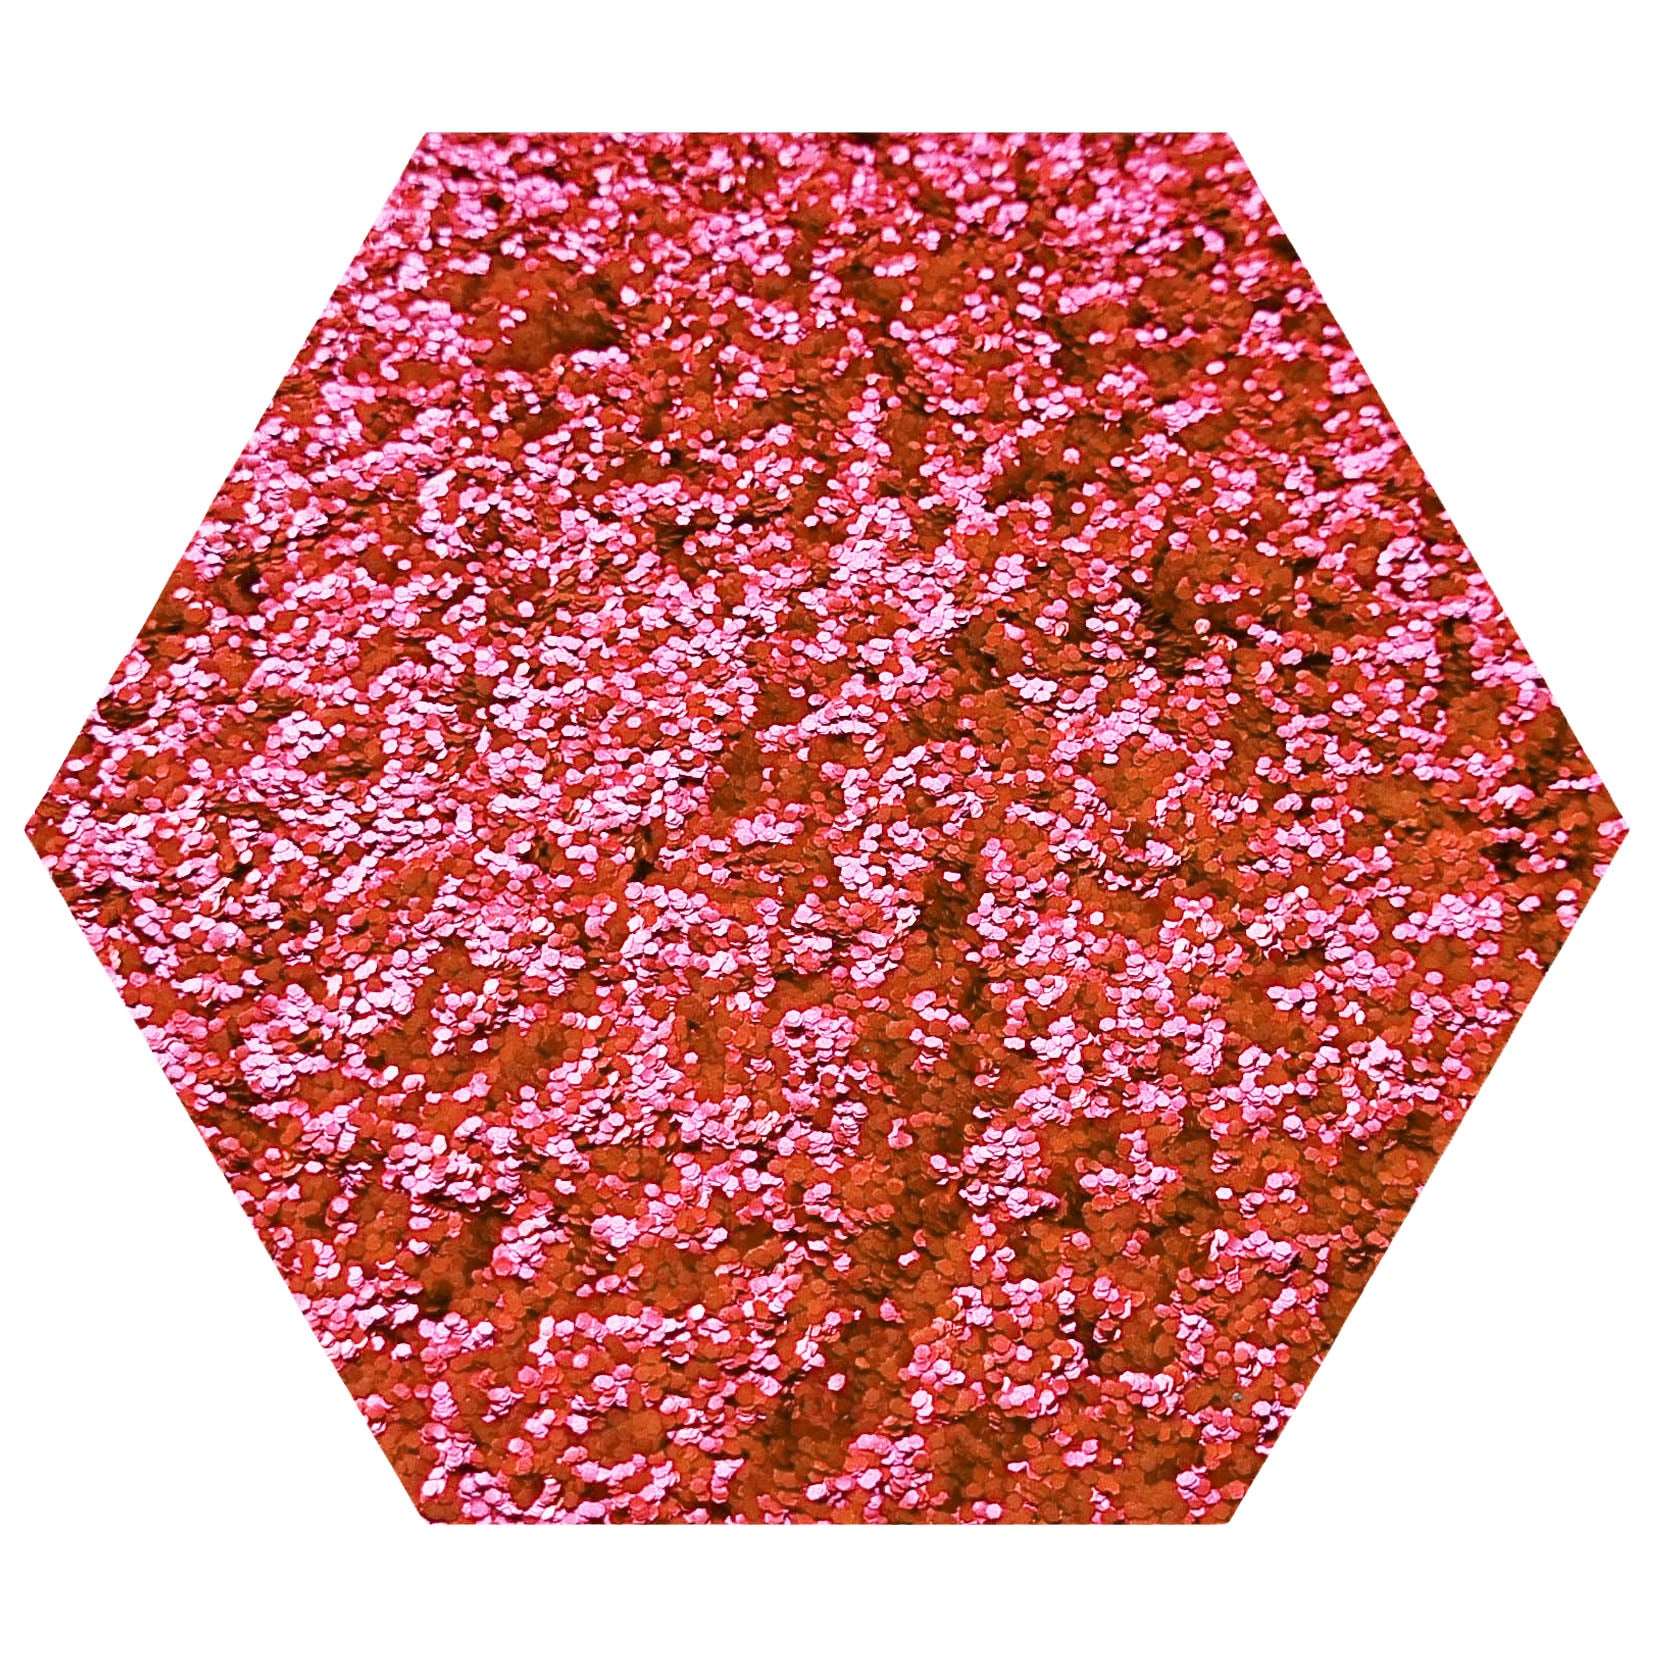 Red Biodegradable Cosmetic Glitter | Medium | Truly Personal | Wax Melt Bath Bombs Soap